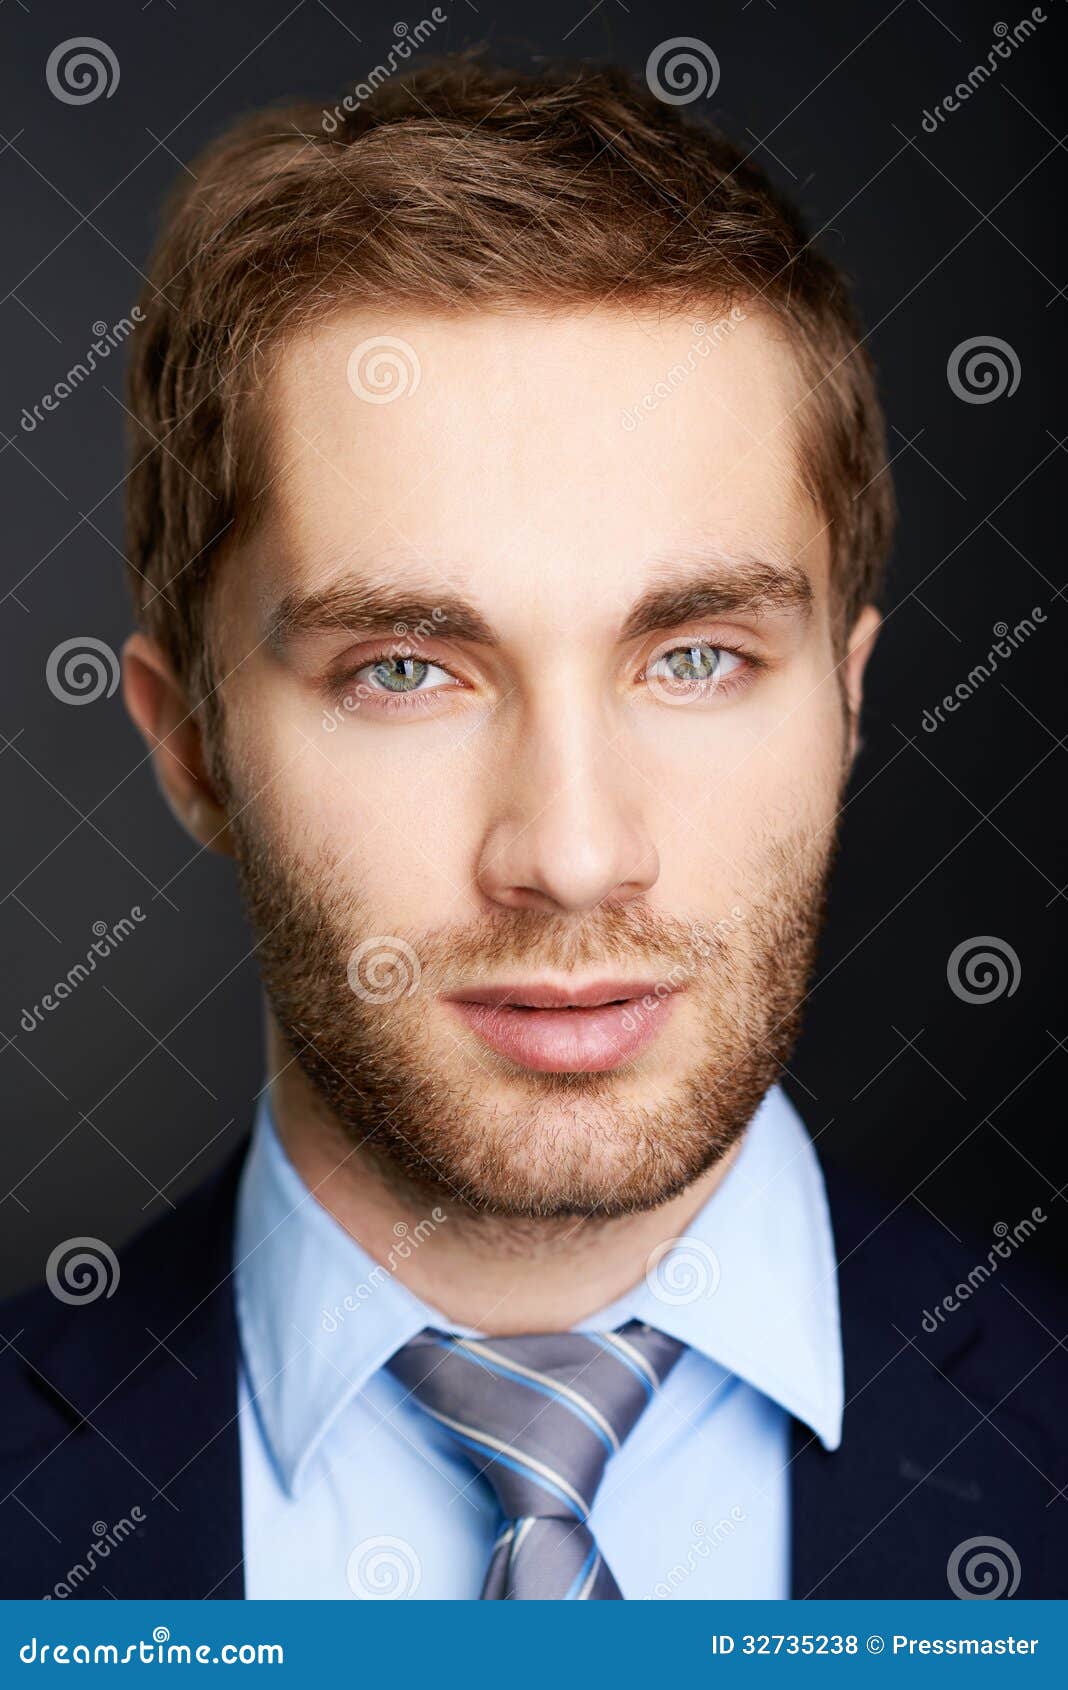 Face of businessman stock photo. Image of businessperson - 32735238